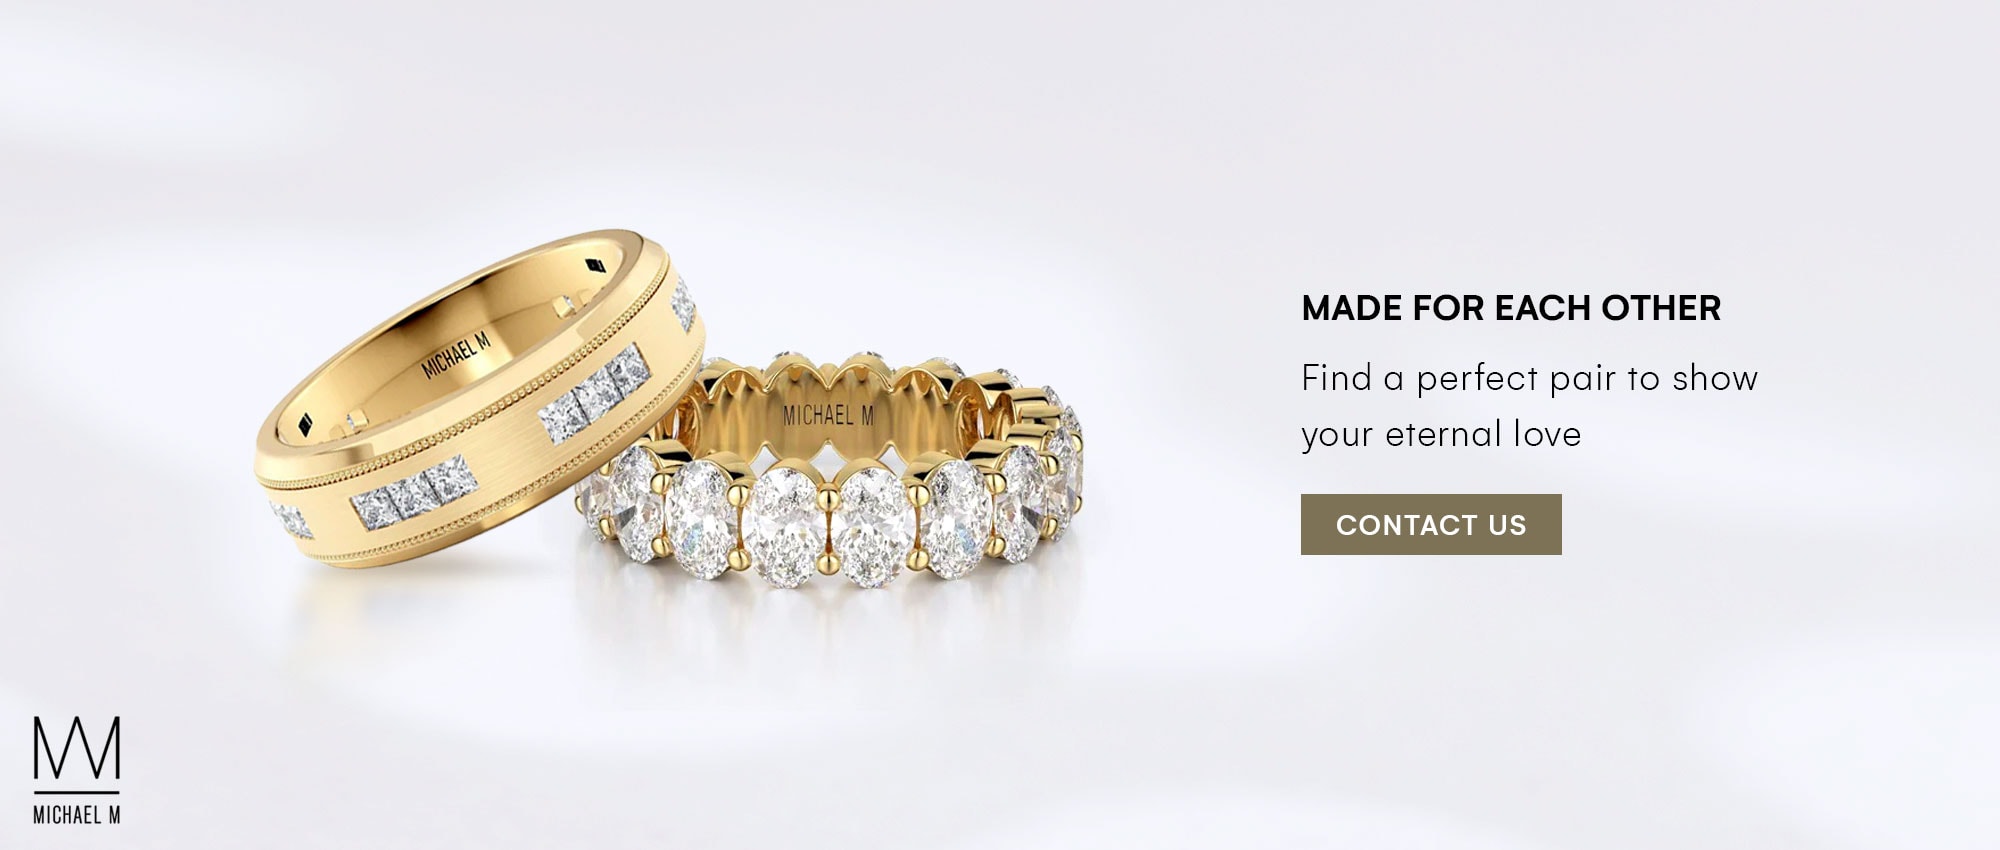 Michael M Wedding Collection At Midtown Jewelers At Midtown Jewelers